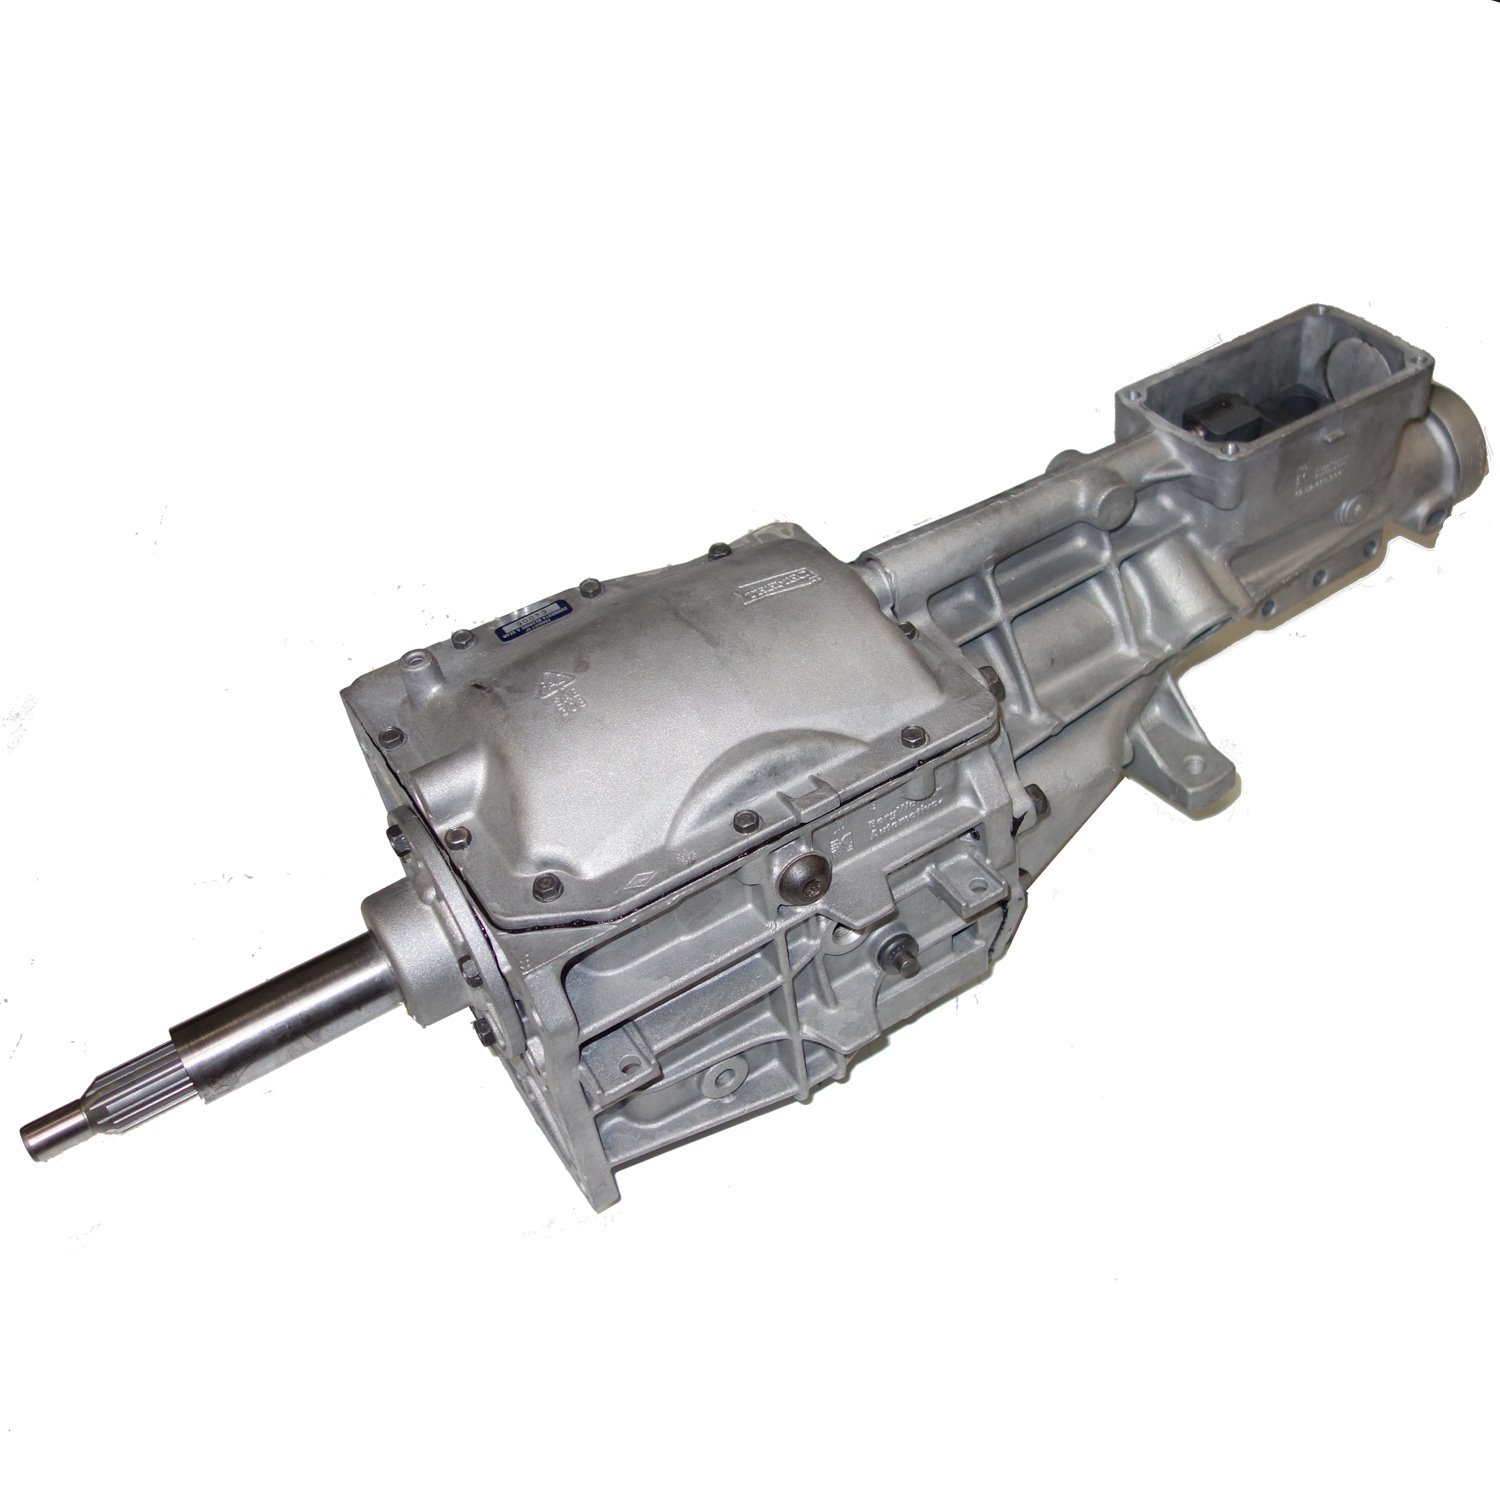 Remanufactured T5 Manual Transmission for Ford 94-95 Mustang,